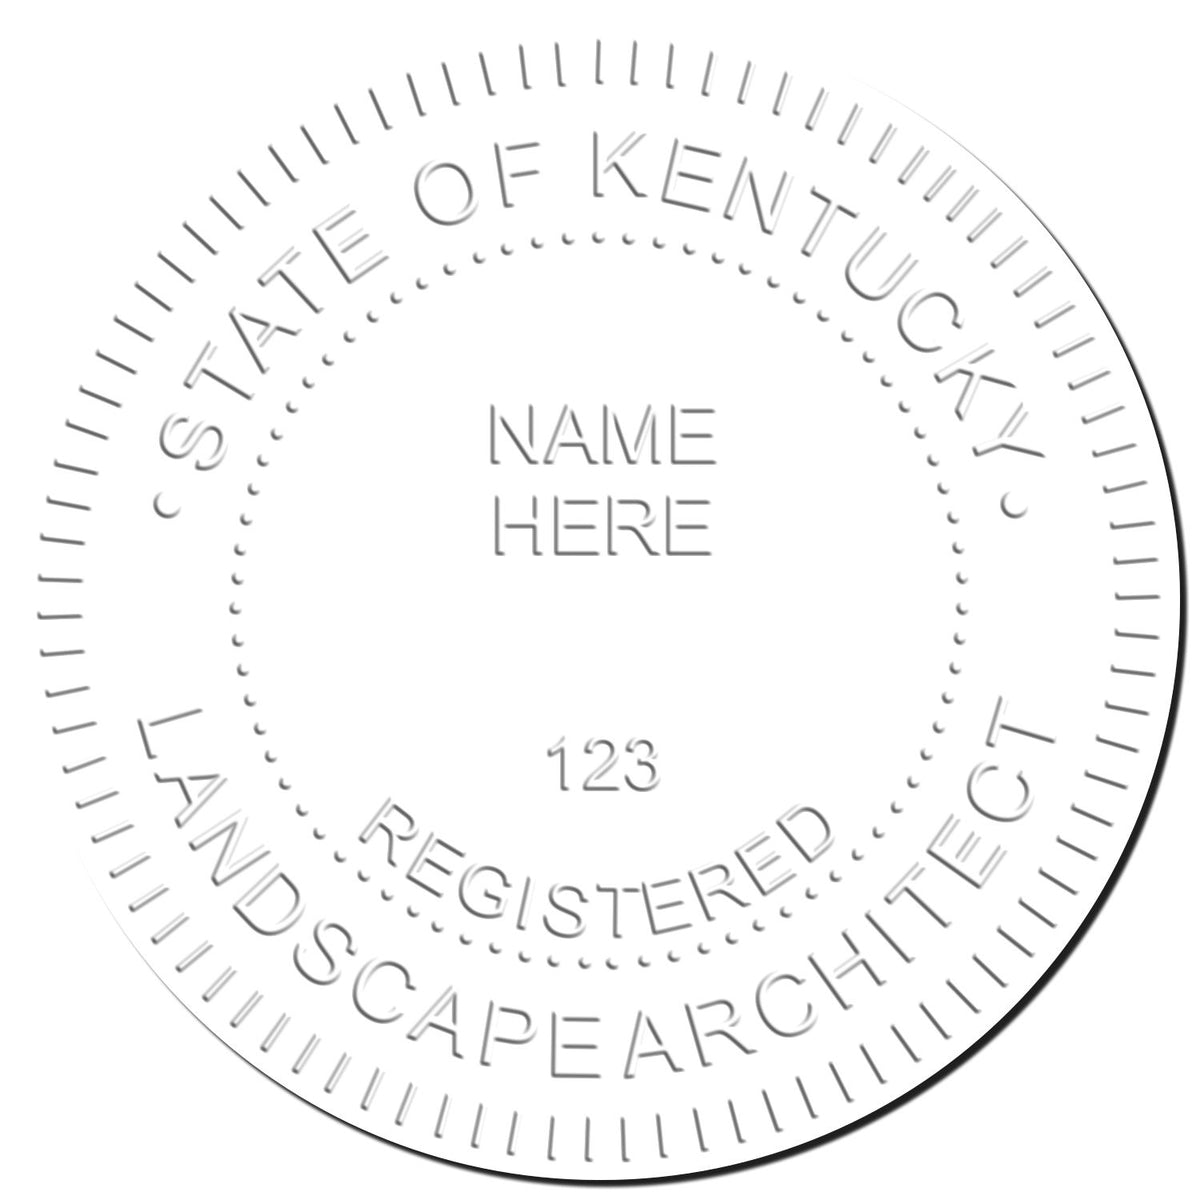 This paper is stamped with a sample imprint of the Gift Kentucky Landscape Architect Seal, signifying its quality and reliability.